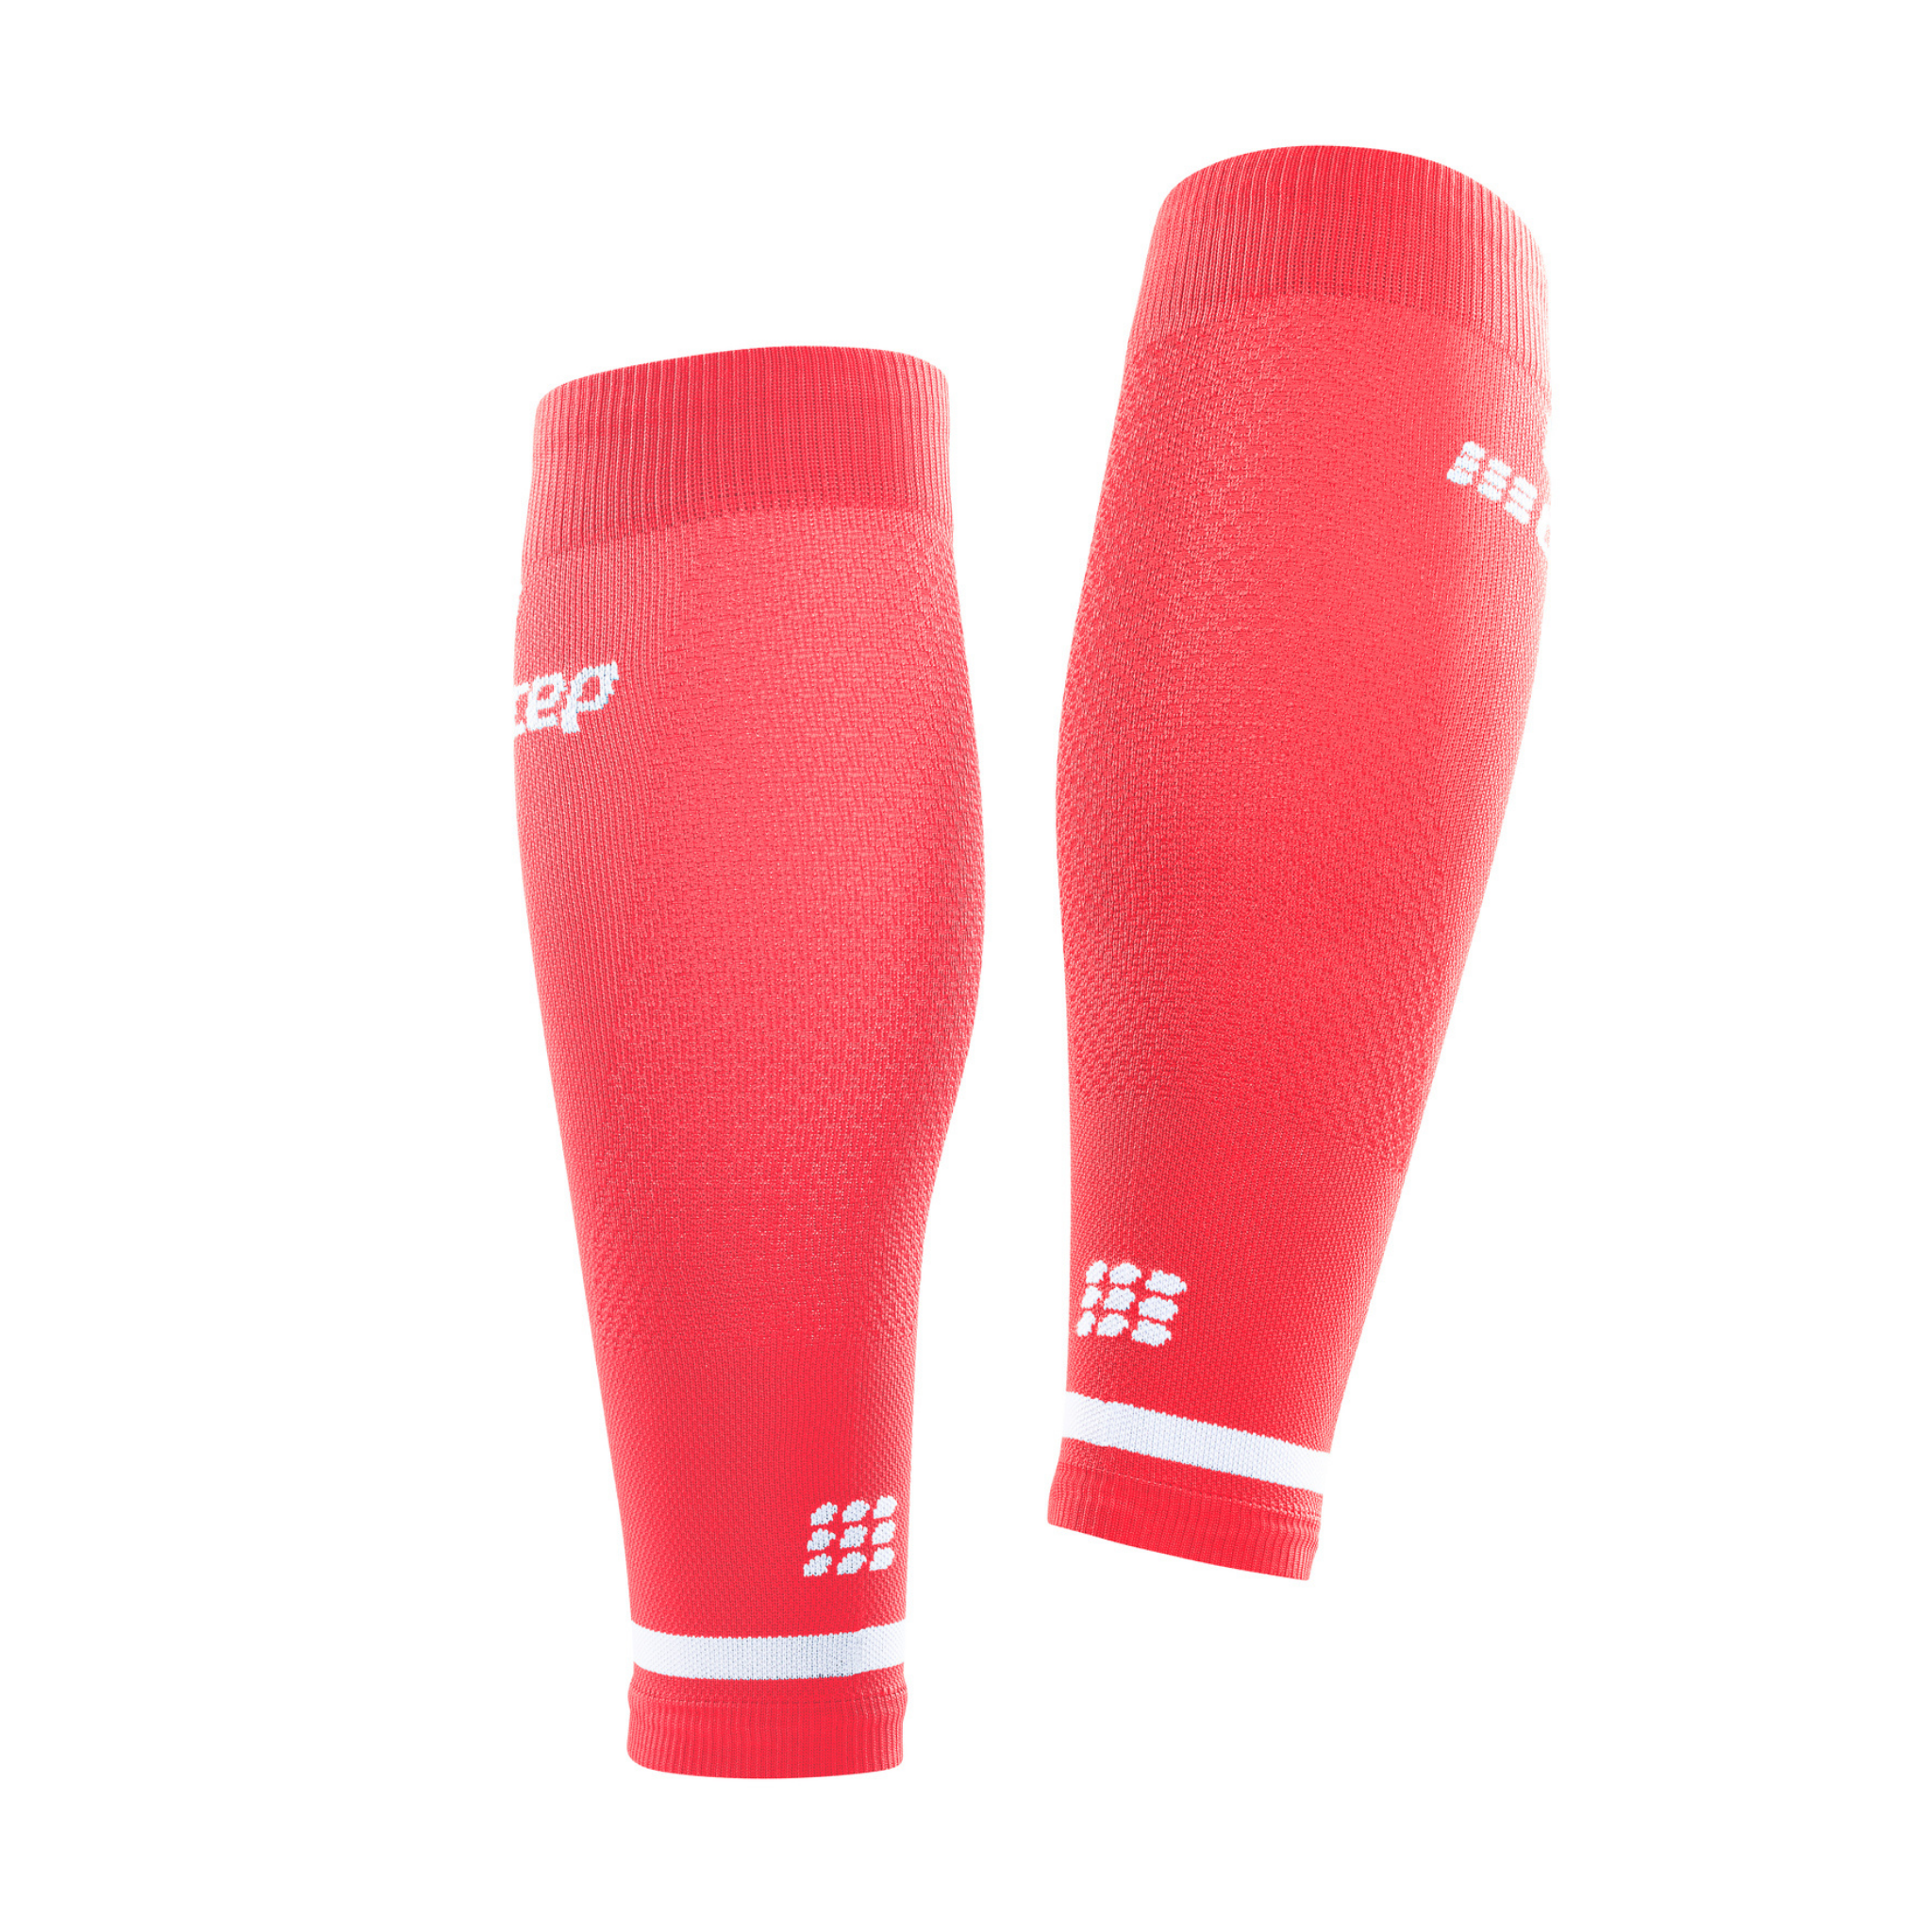 CEP - Women's THE RUN COMPRESSION CALF SLEEVES, stabilizing calf  compression sleeves for running, calf support, Black